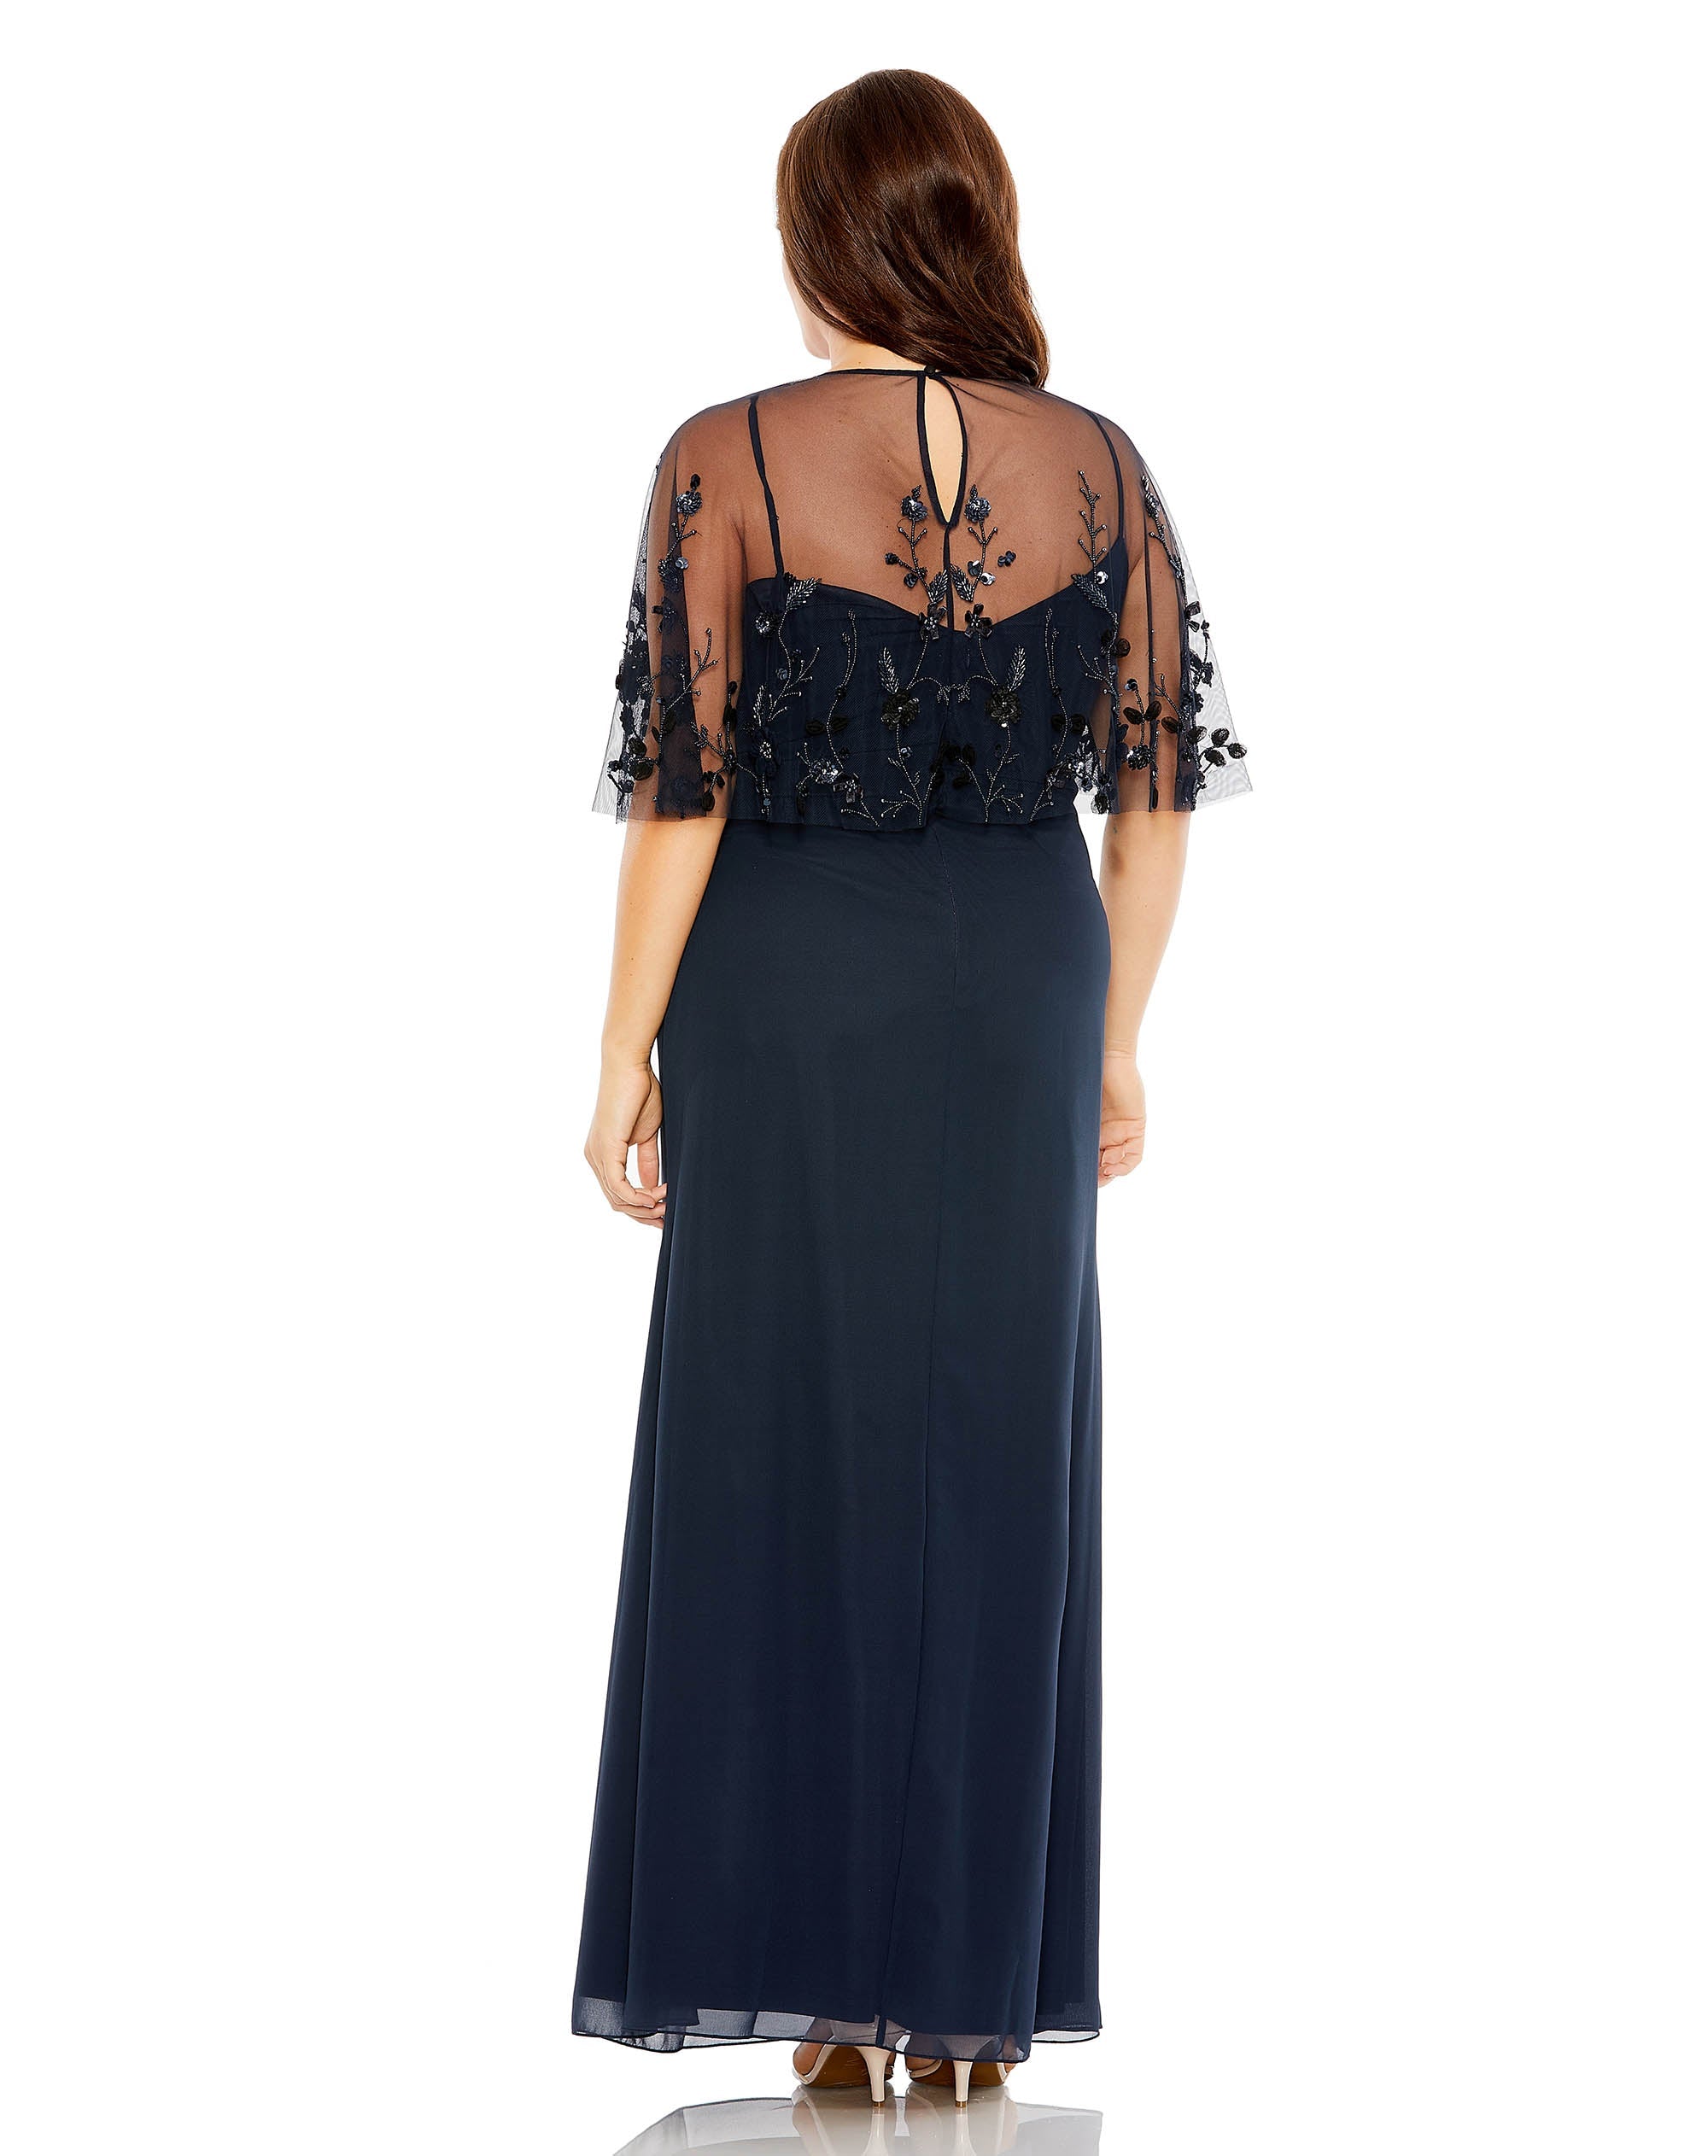 Plus Size Dresses Plus Size Long Formal Gown Midnight